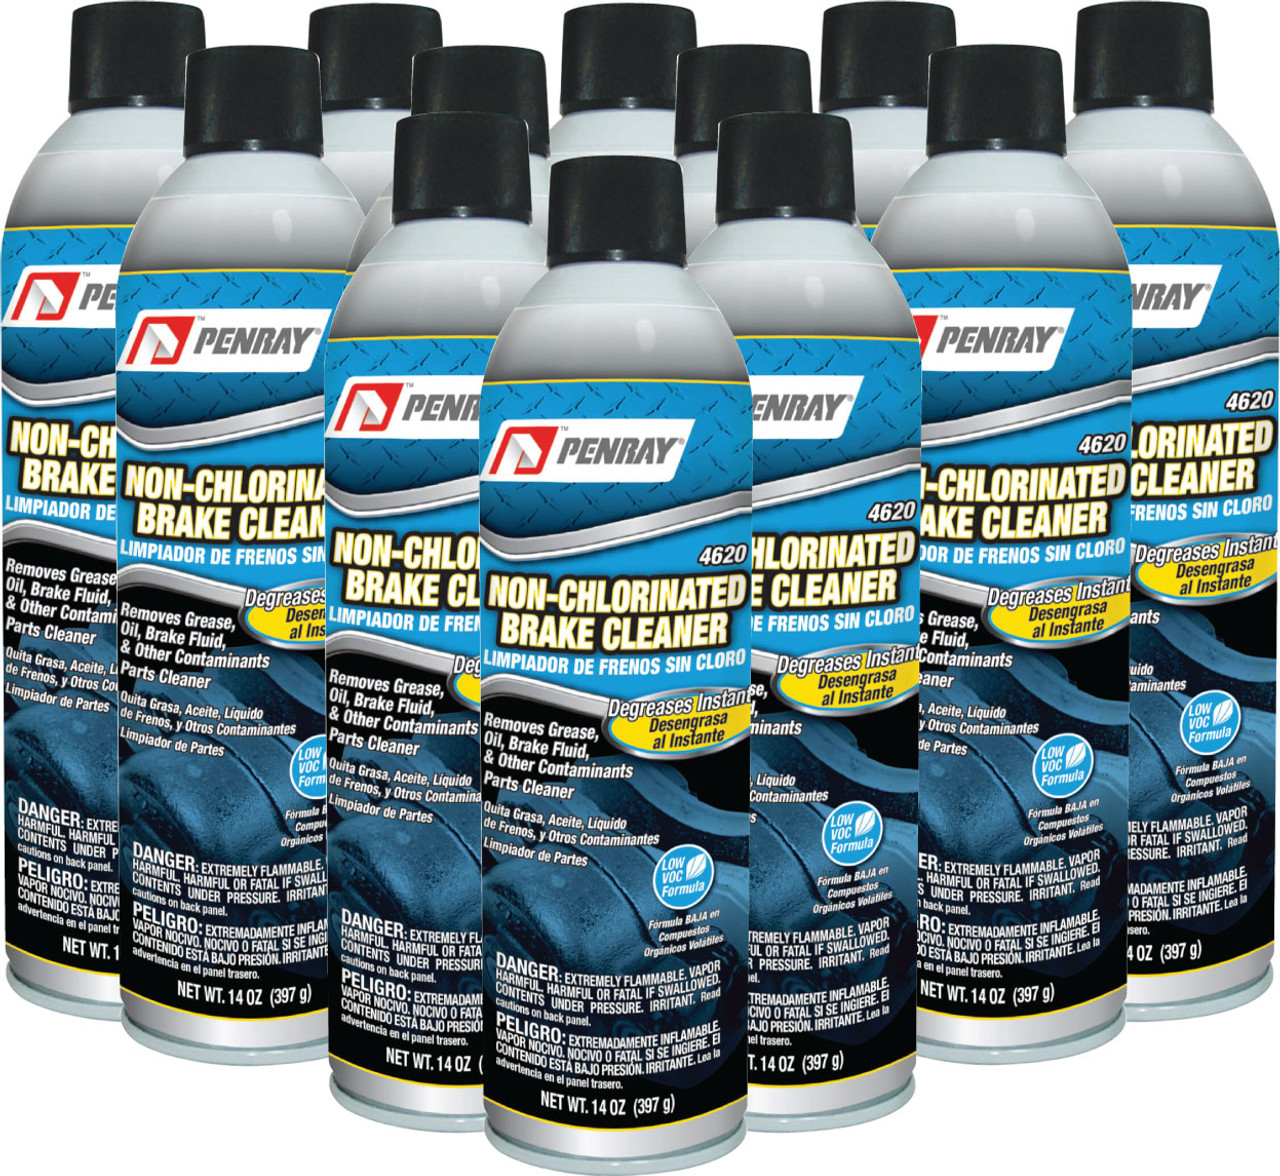 4520 NON-CHLORINATED QUICK DRY BRAKE CLEANER - Penray